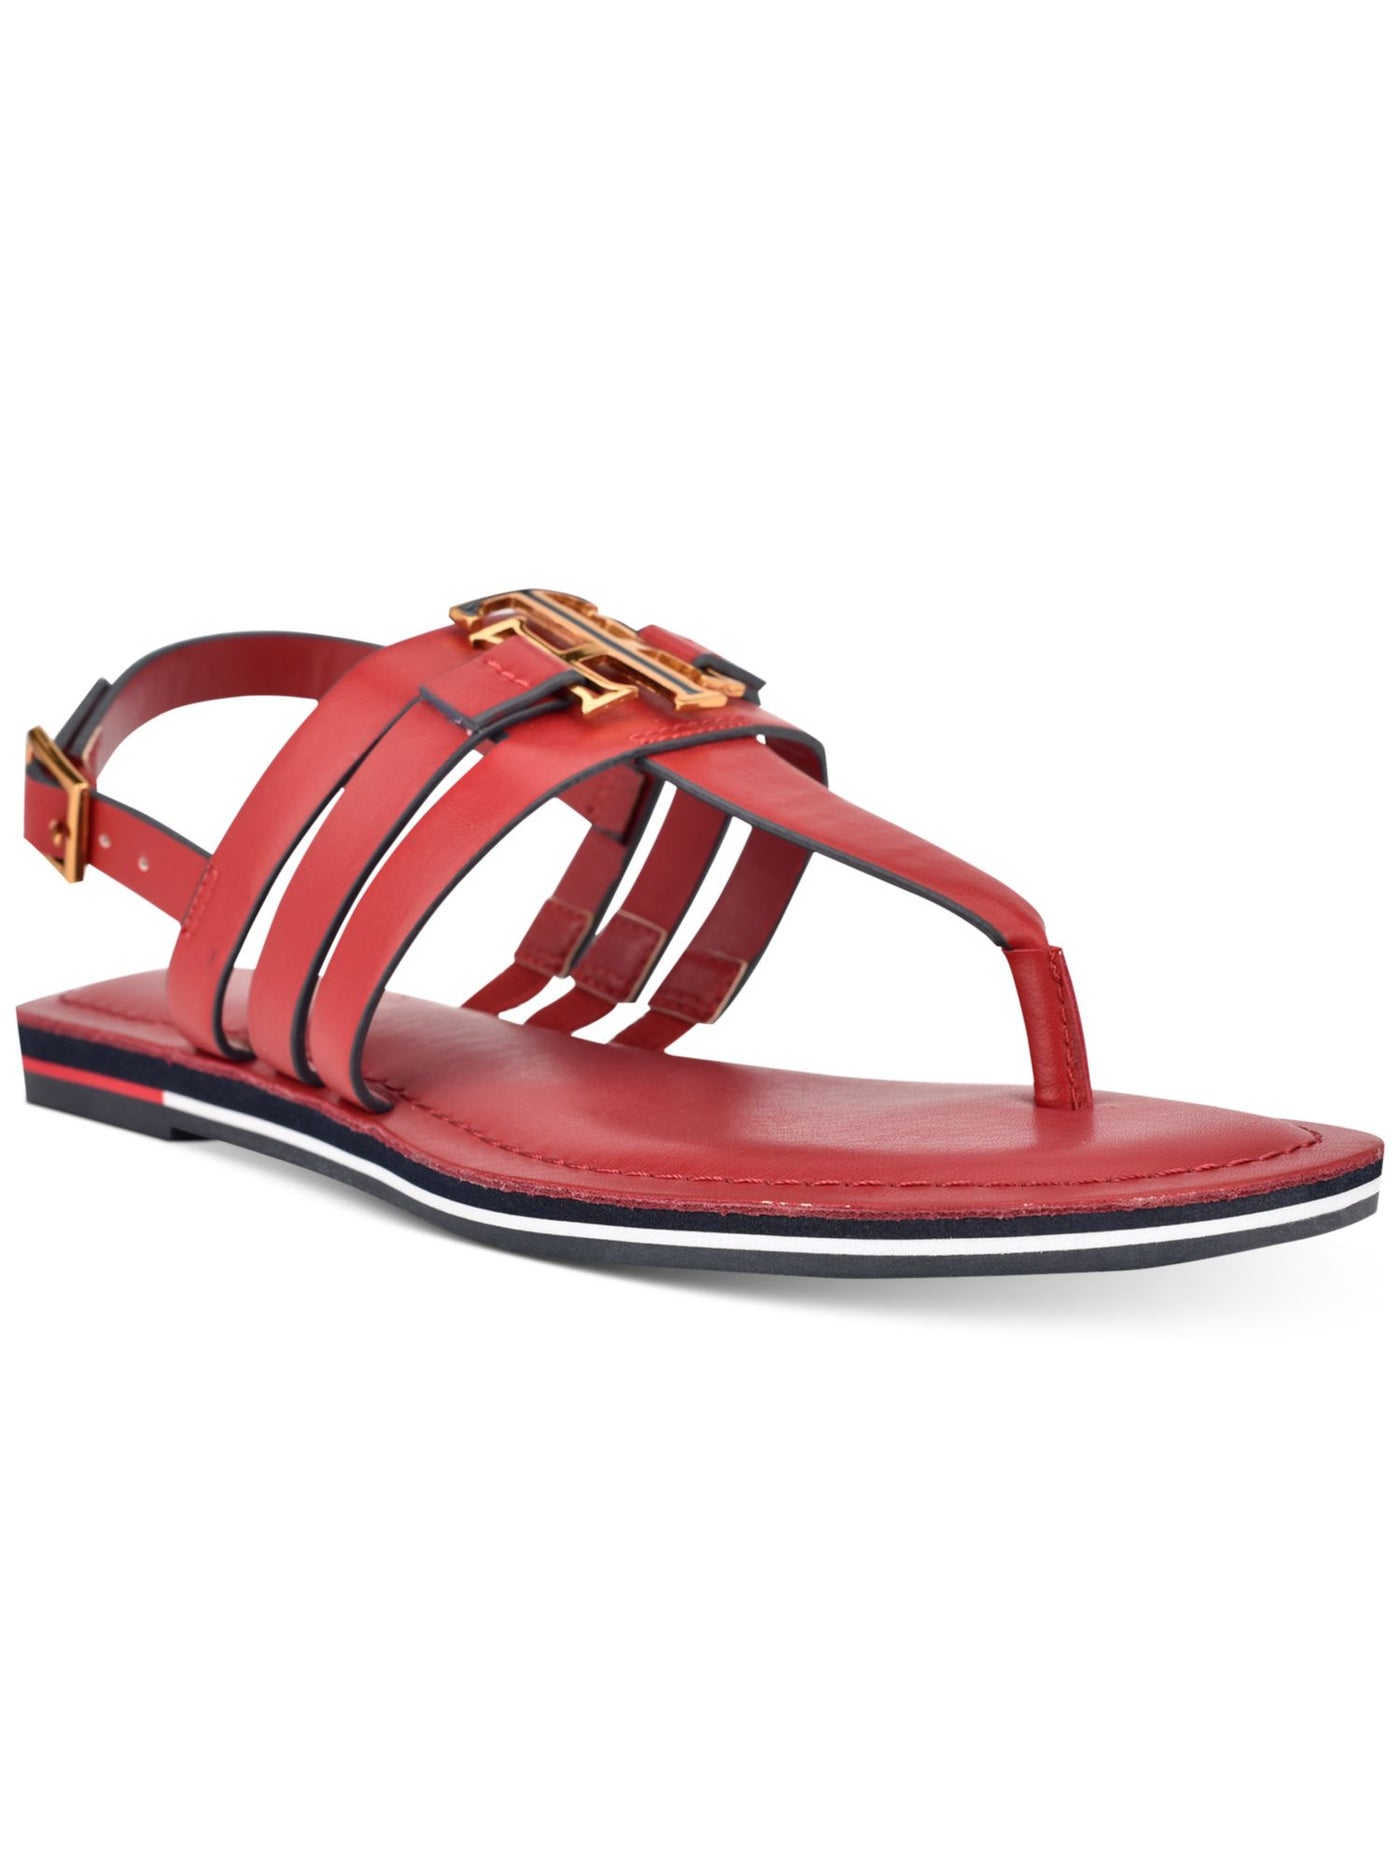 TOMMY HILFIGER Womens Coral Logo Adjustable Strap Cushioned Sherlie Round Toe Buckle Thong Sandals 6.5 M